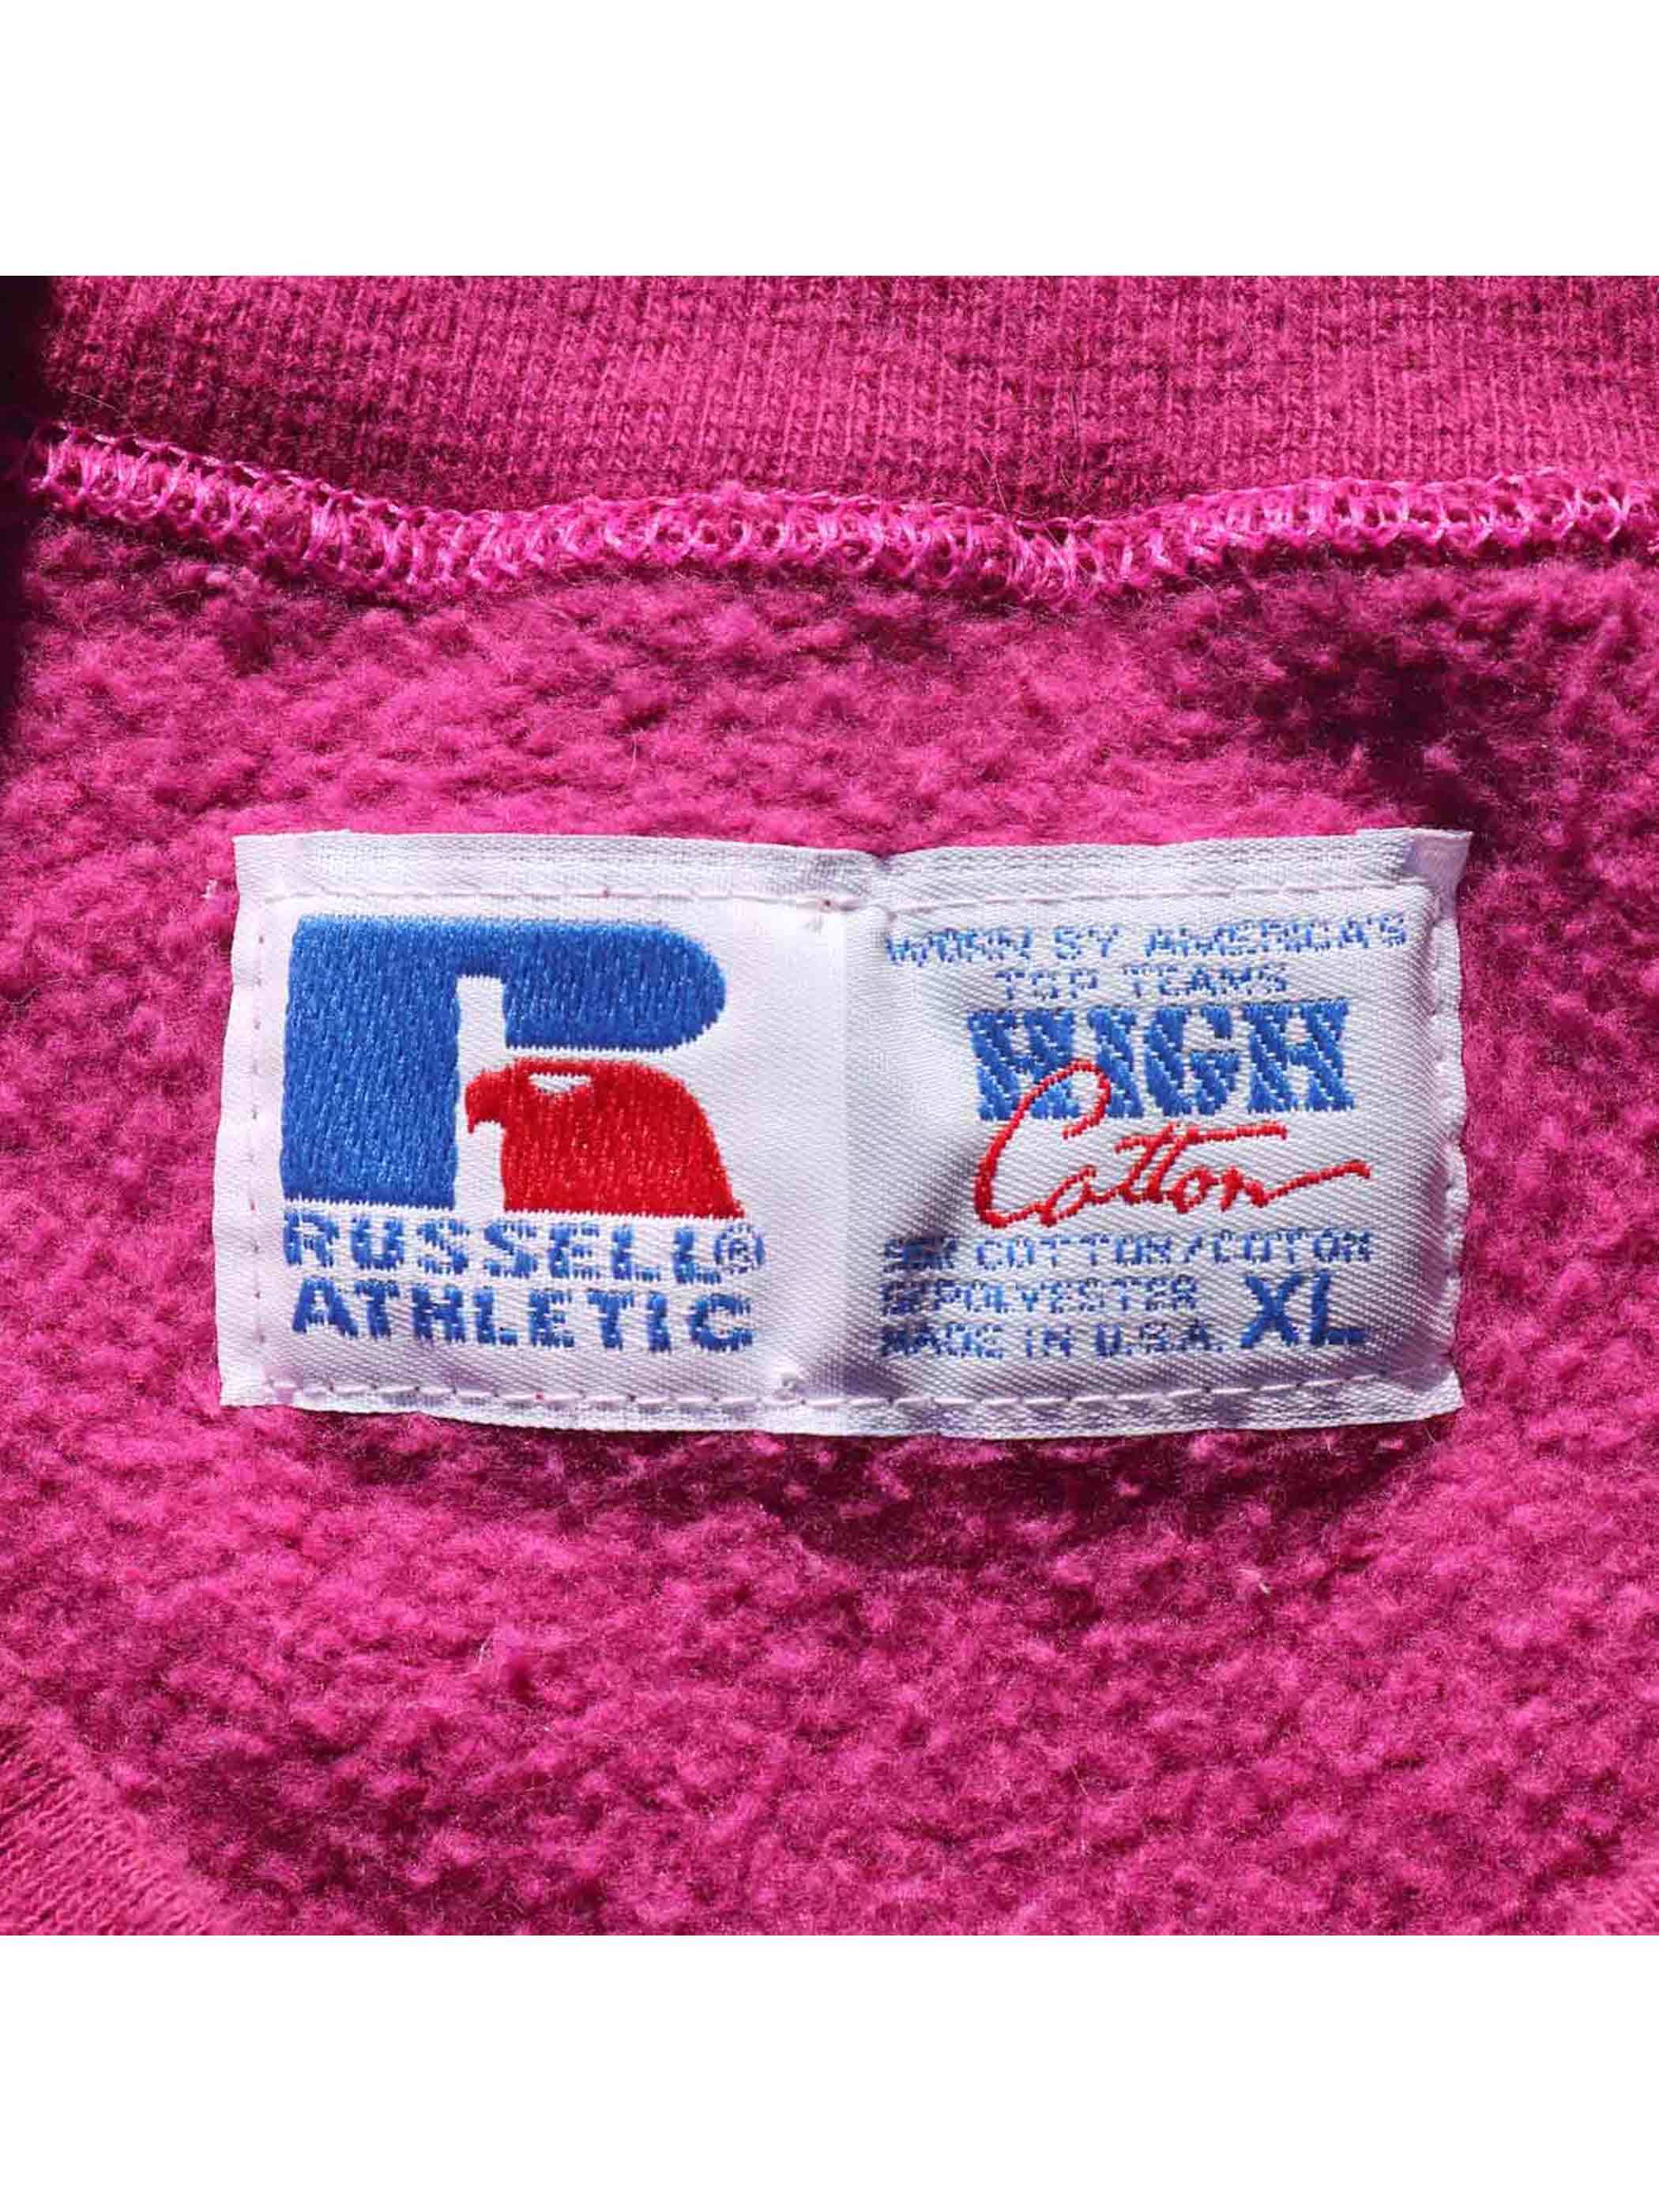 90 S Russell Athletic Usa製 ピンク 無地 ショートスリーブスウェット Xl Post Junk Houyhnhnm S